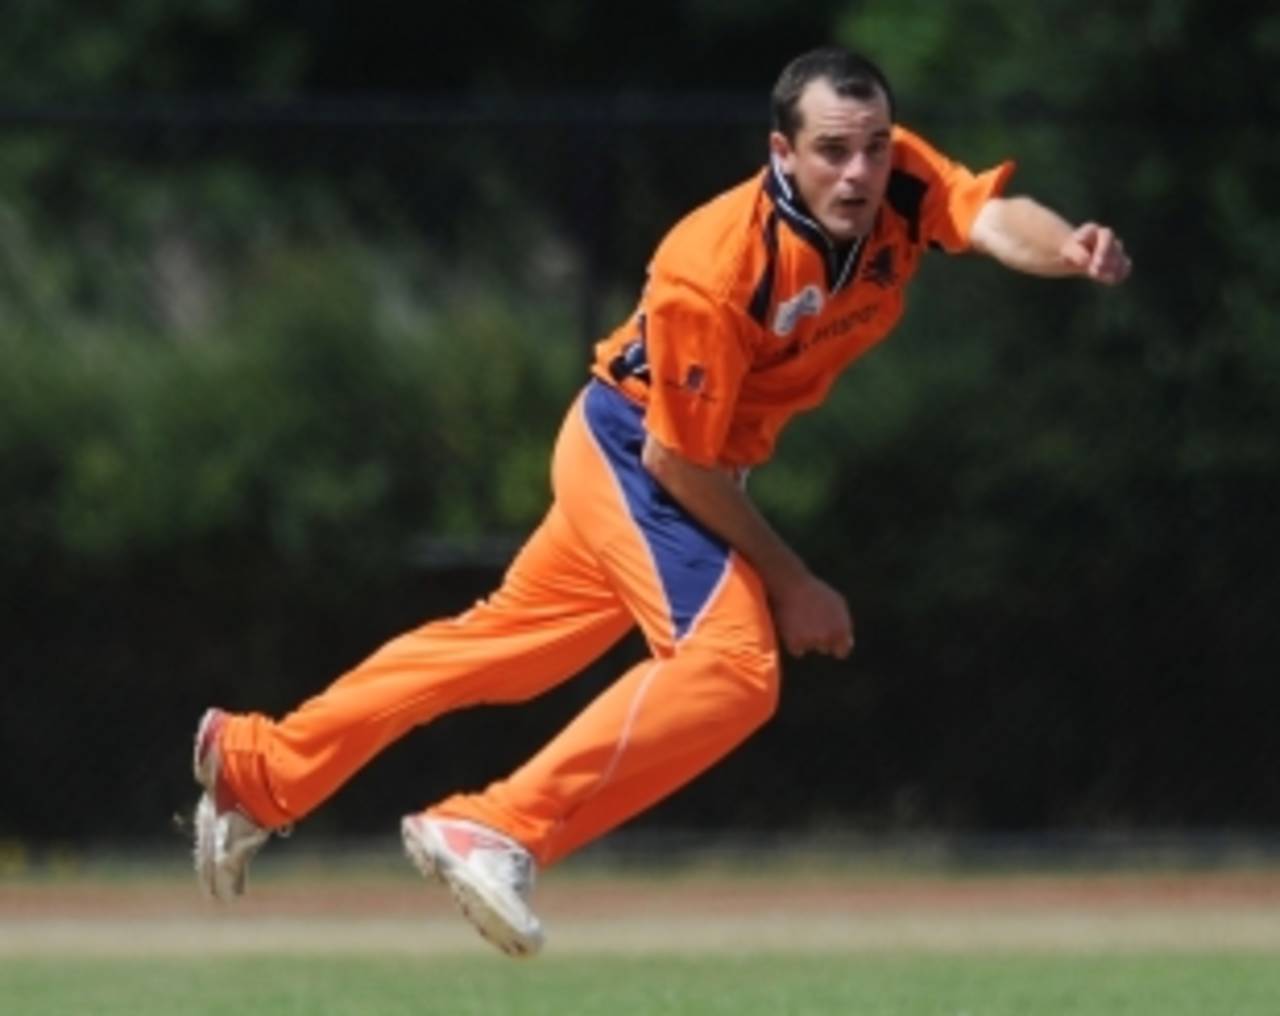 Peter Borren in his follow through after delivering a ball against Canada, Netherlands v Canada, ICC WCL Division 1, Rotterdam, July 5 2010